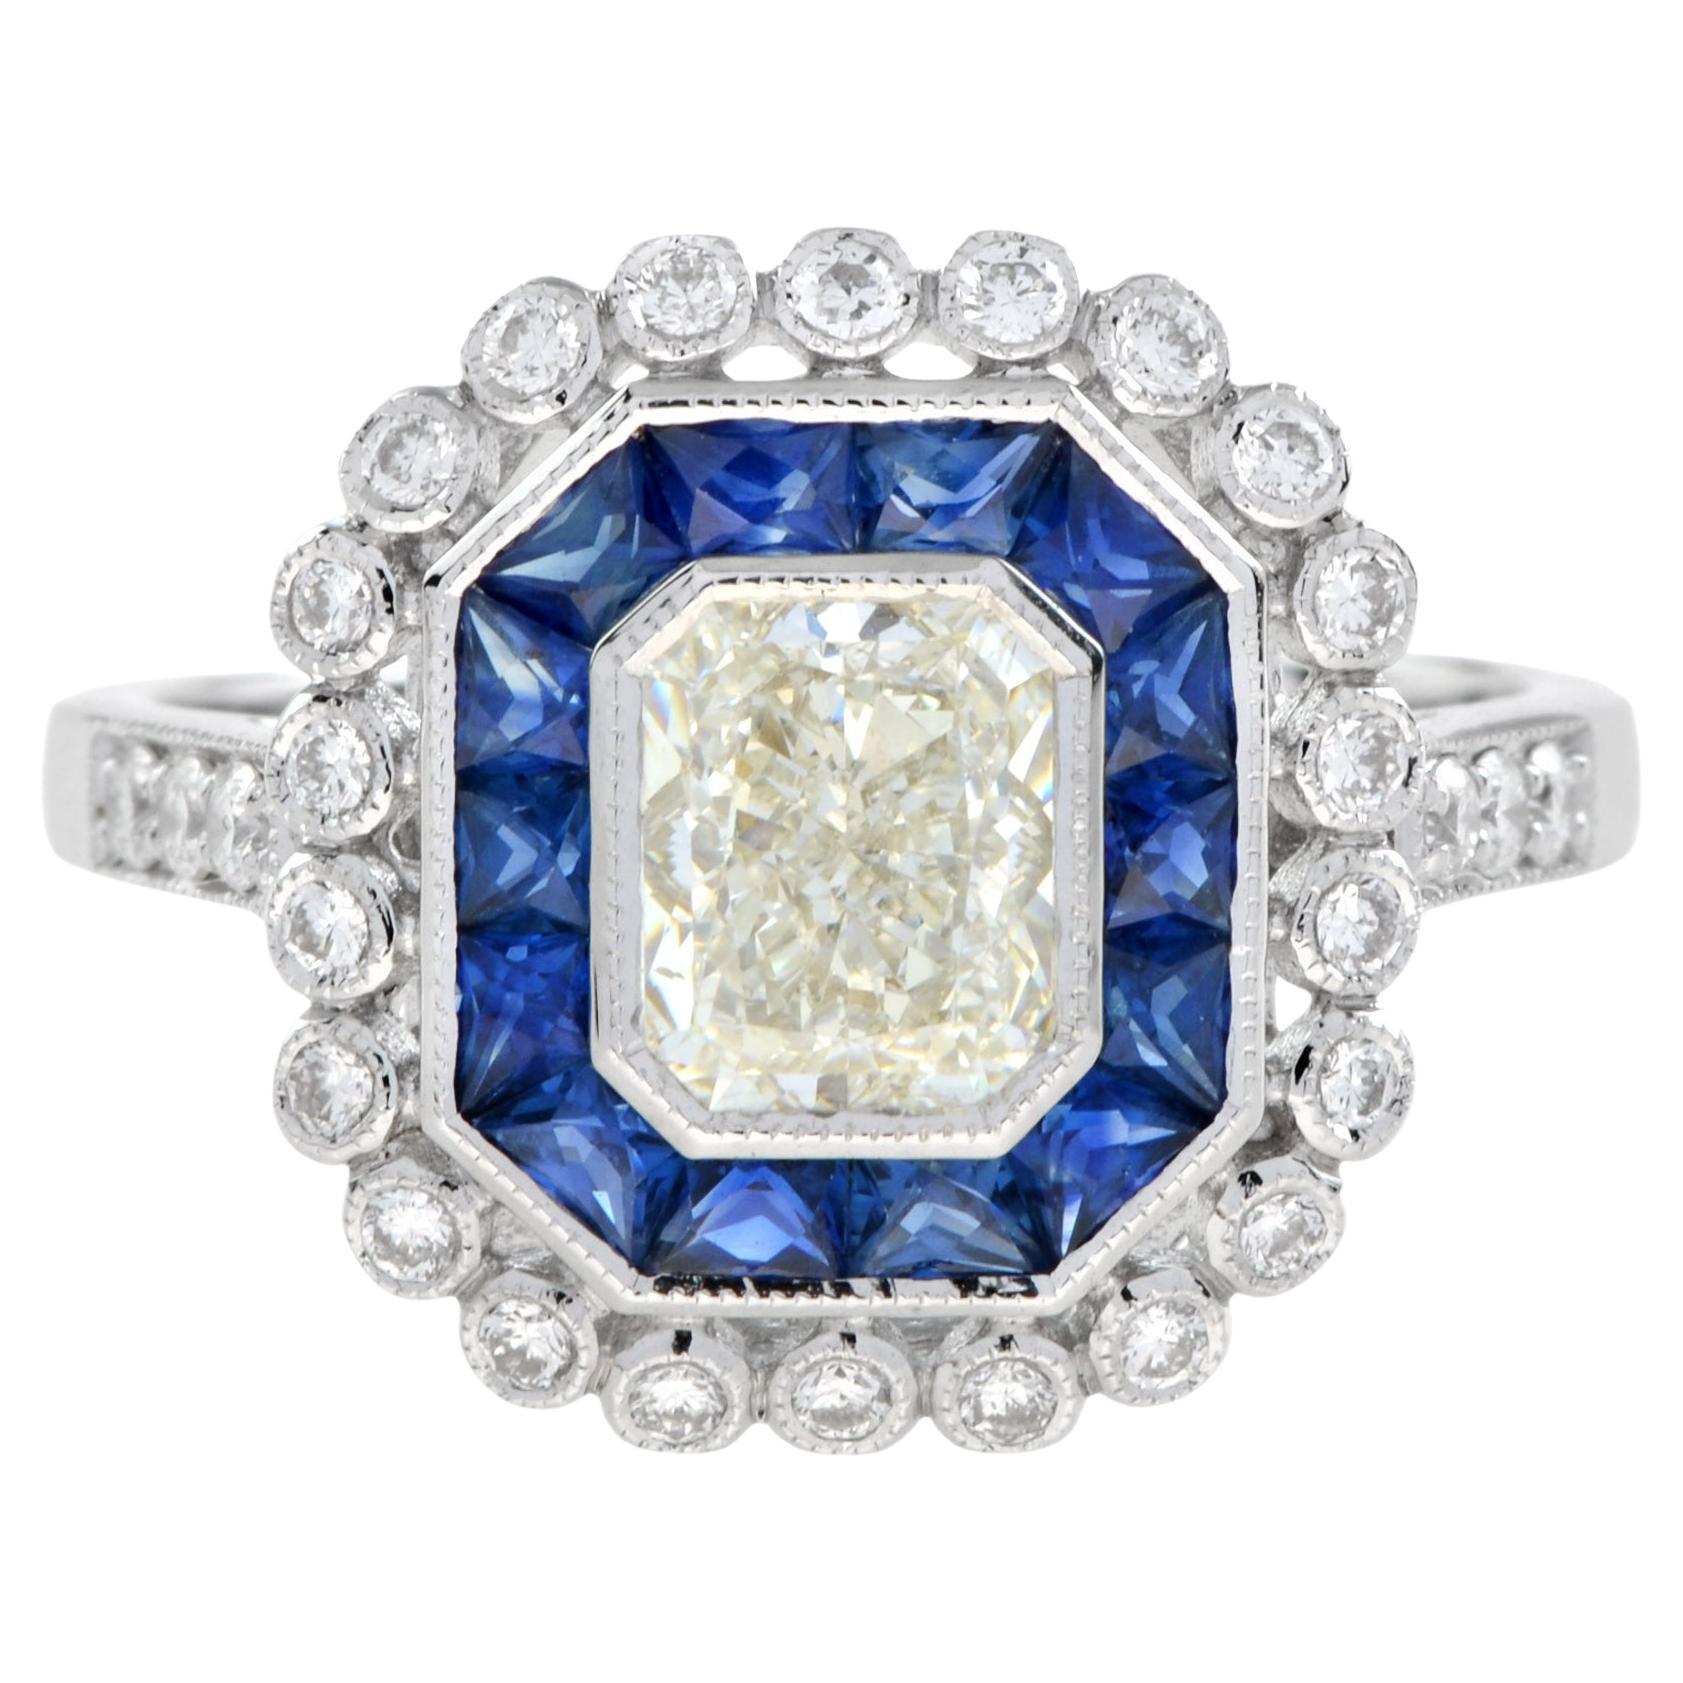 GIA 1.04 Ct. Diamond Sapphire Art Deco Style Engagement Ring in 18K White Gold For Sale